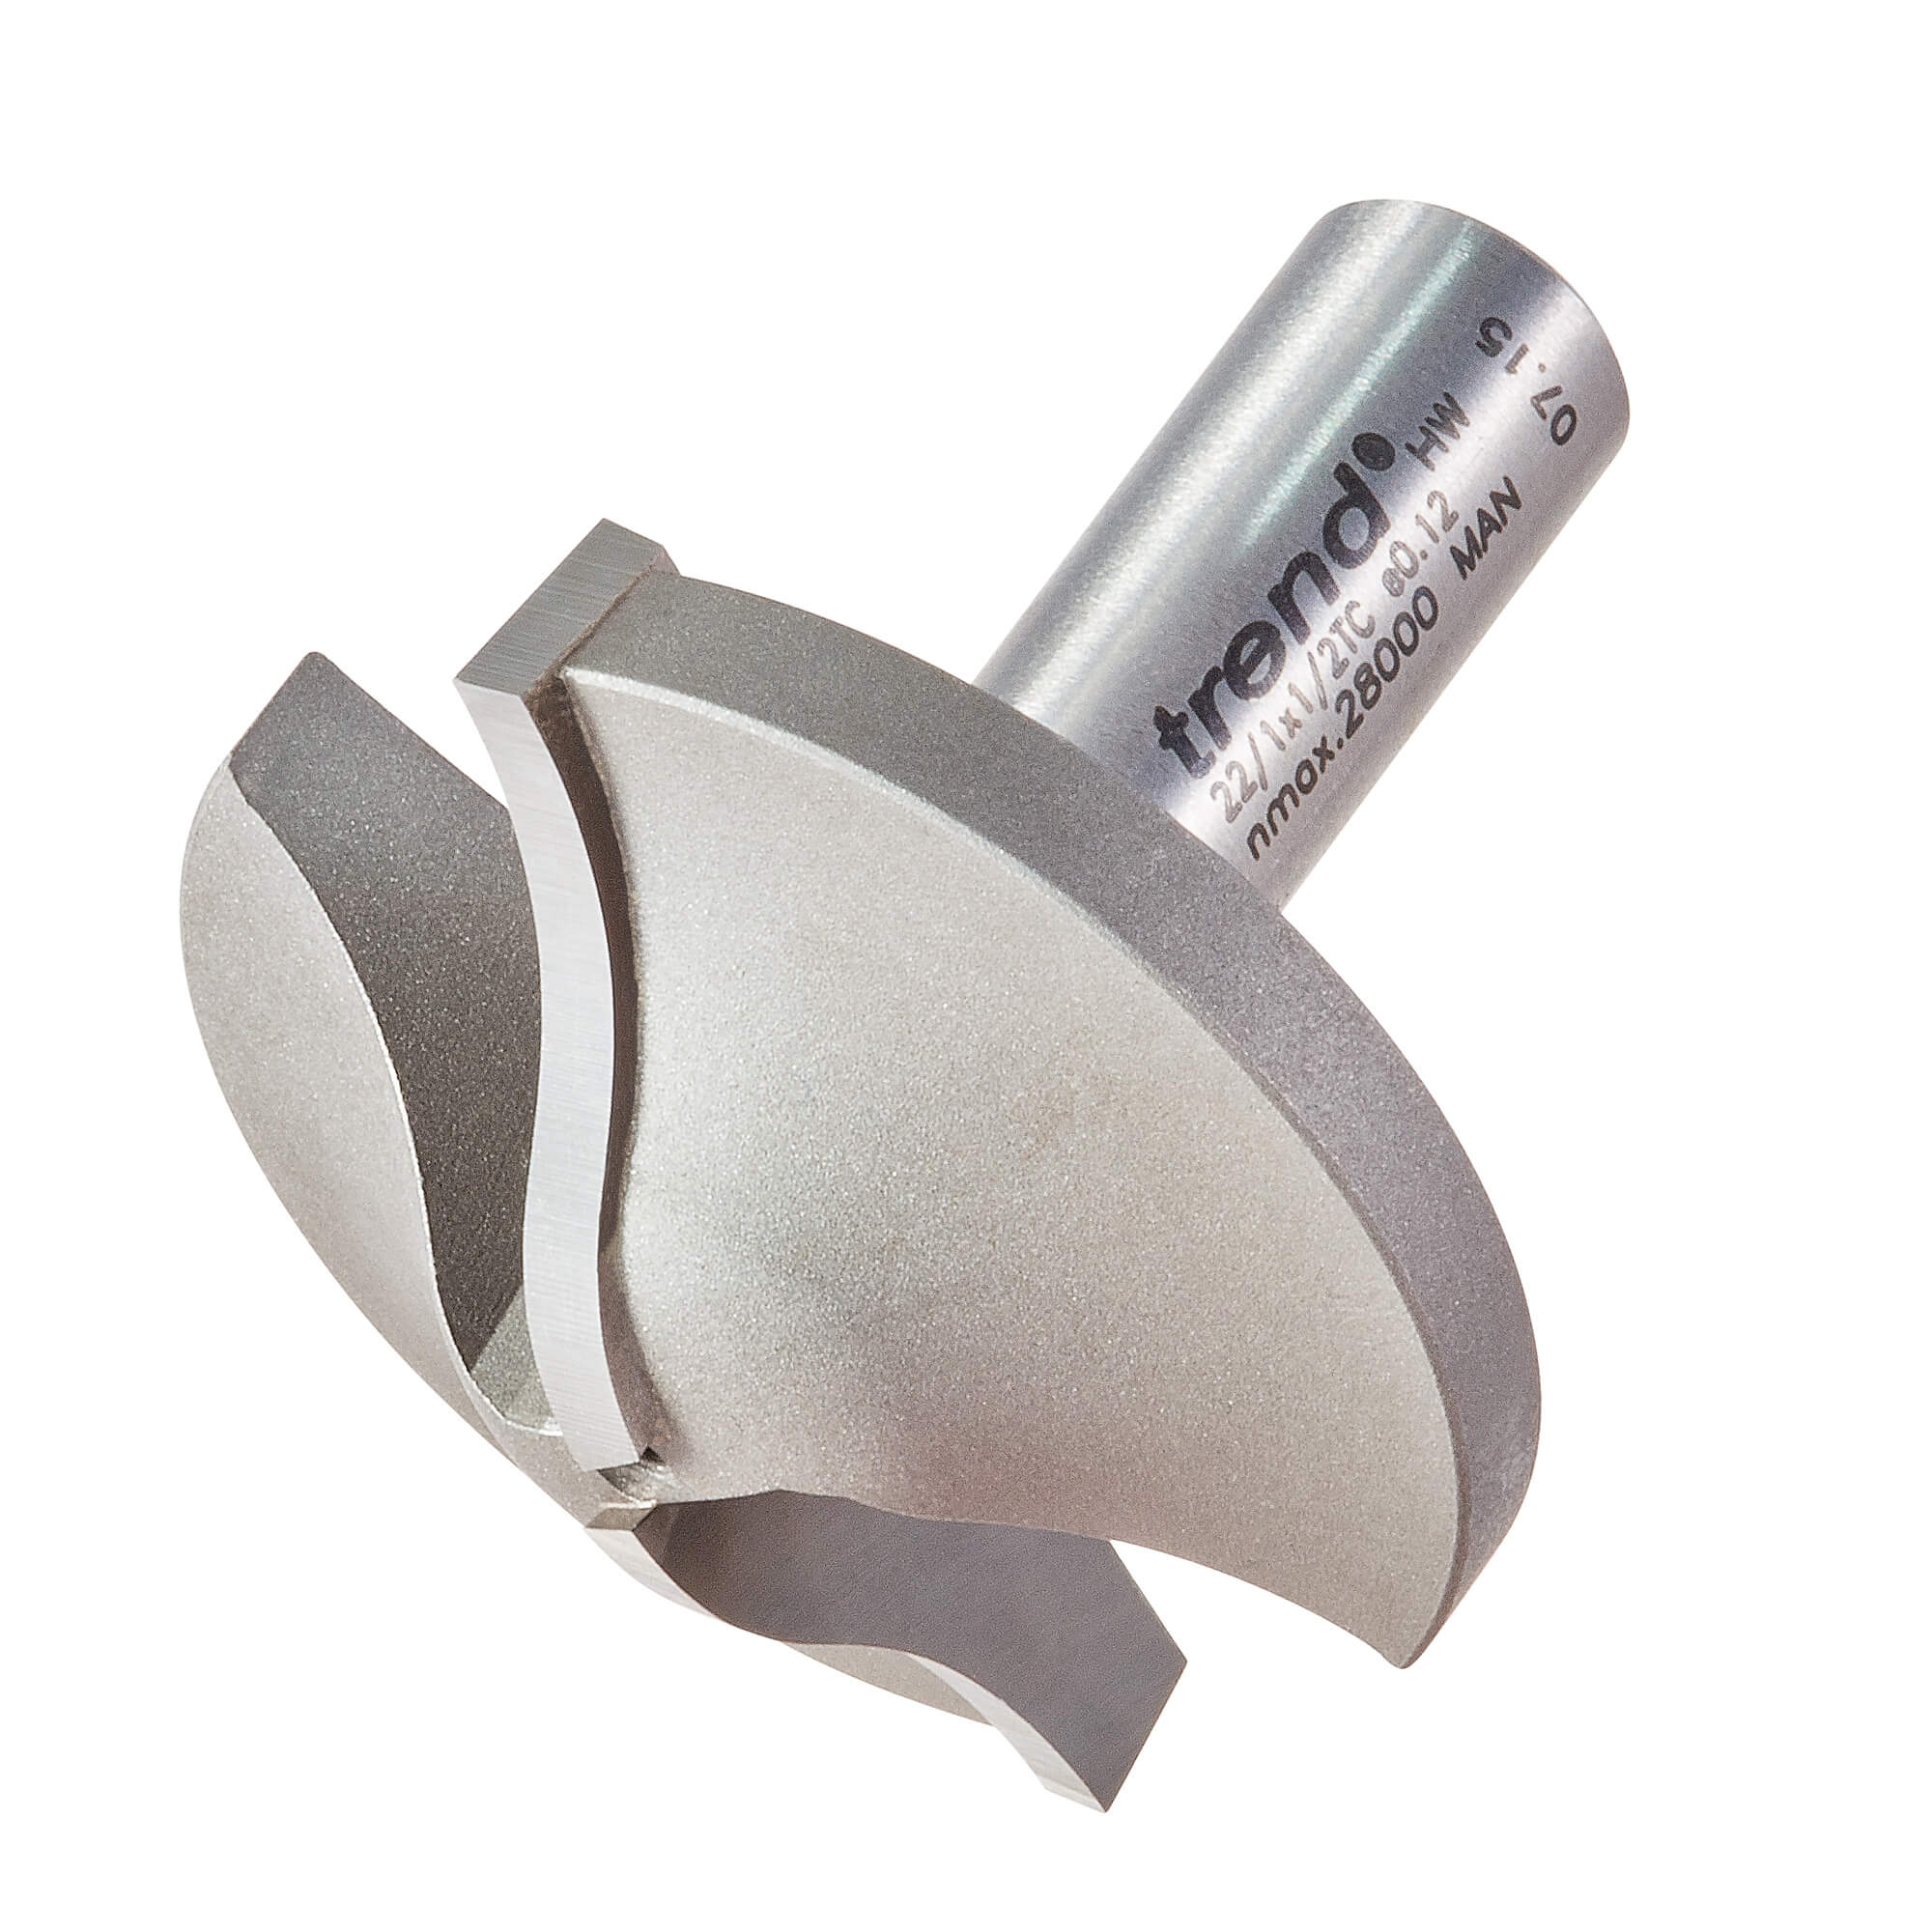 Image of Trend Large Flat Roman Ogee Router Cutter 50mm 6.5mm 1/2"